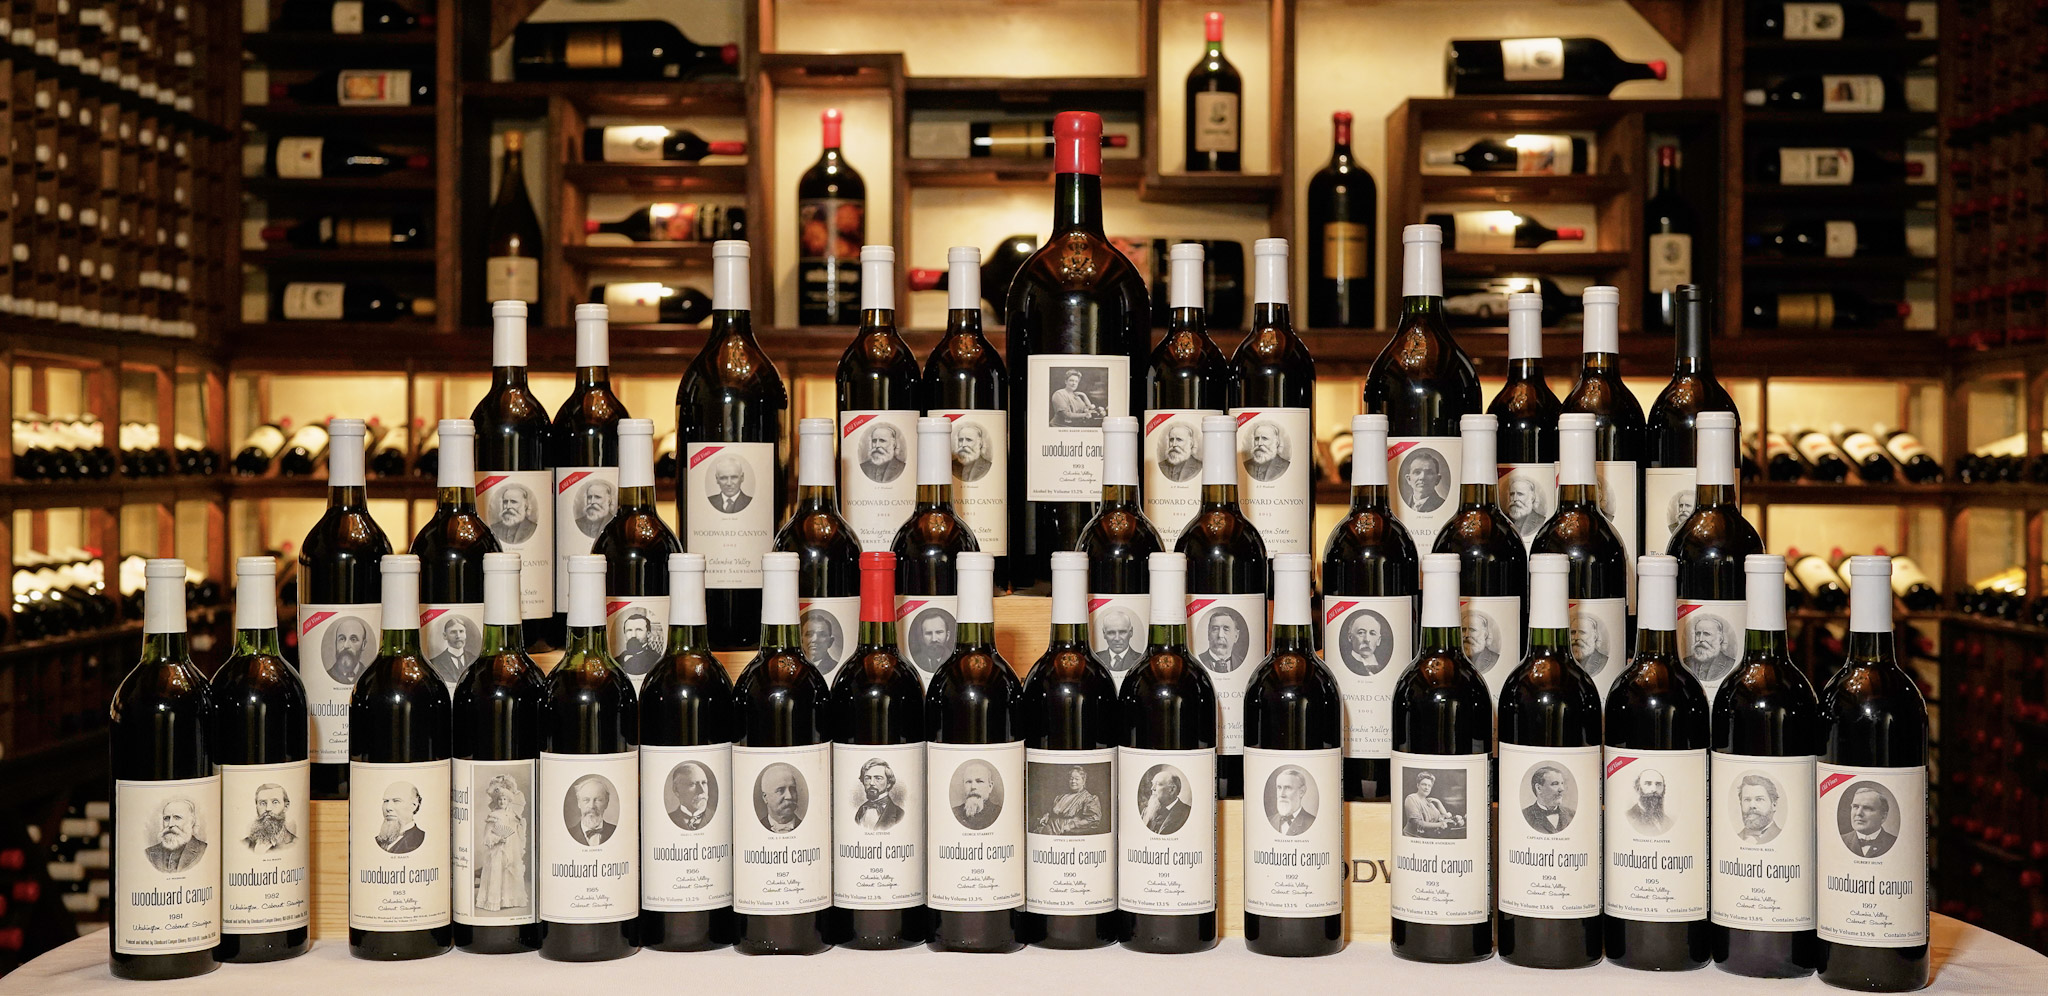 26 fine wines displayed in a row